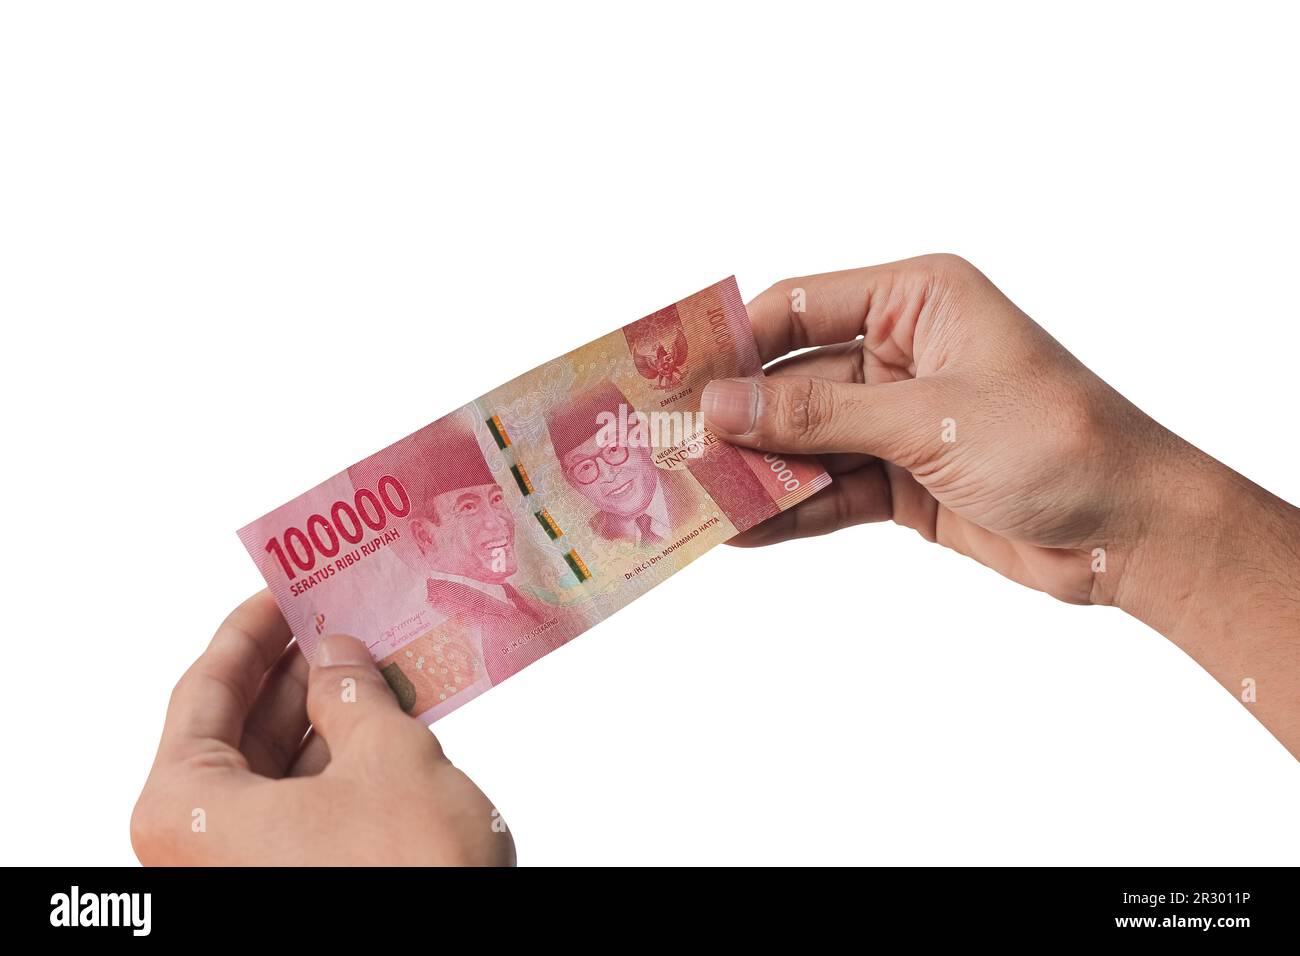 Hand holding one hundred thousand rupiah banknote isolated on a white background. financial concept Stock Photo